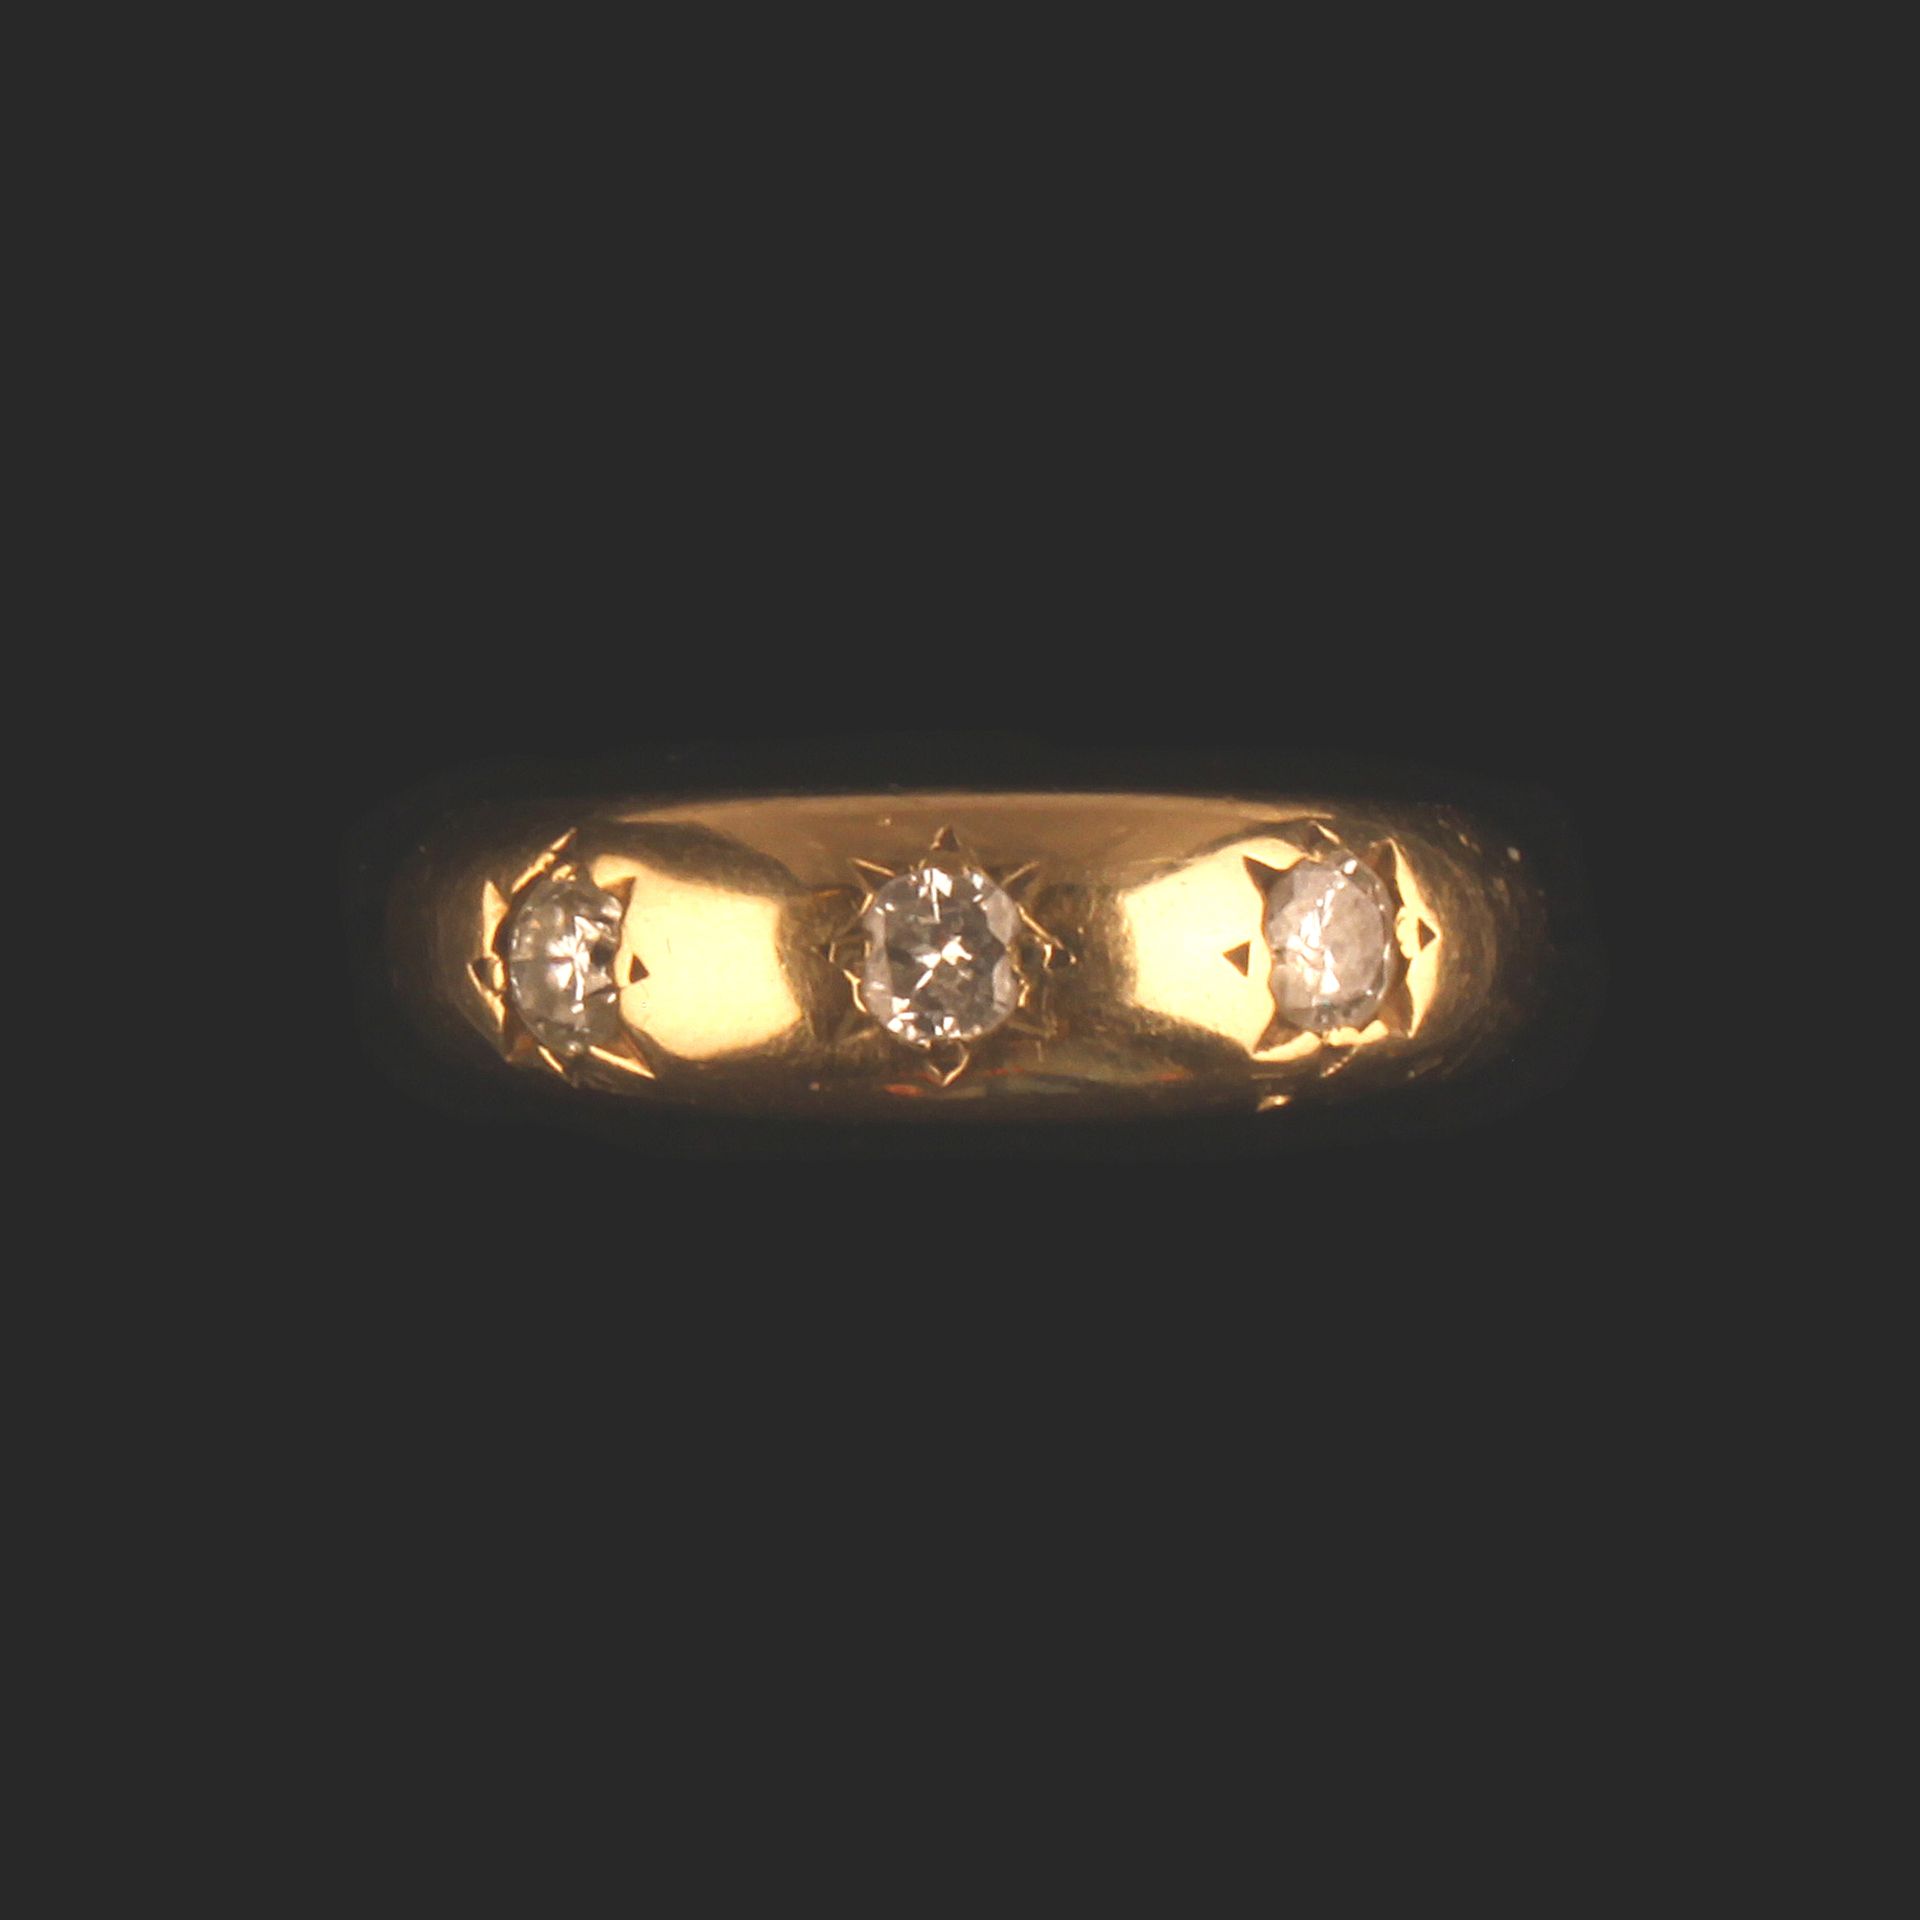 9ct GOLD GYPSY RING SET WITH 3 GOOD QUALITY DIAMONDS - Image 4 of 4